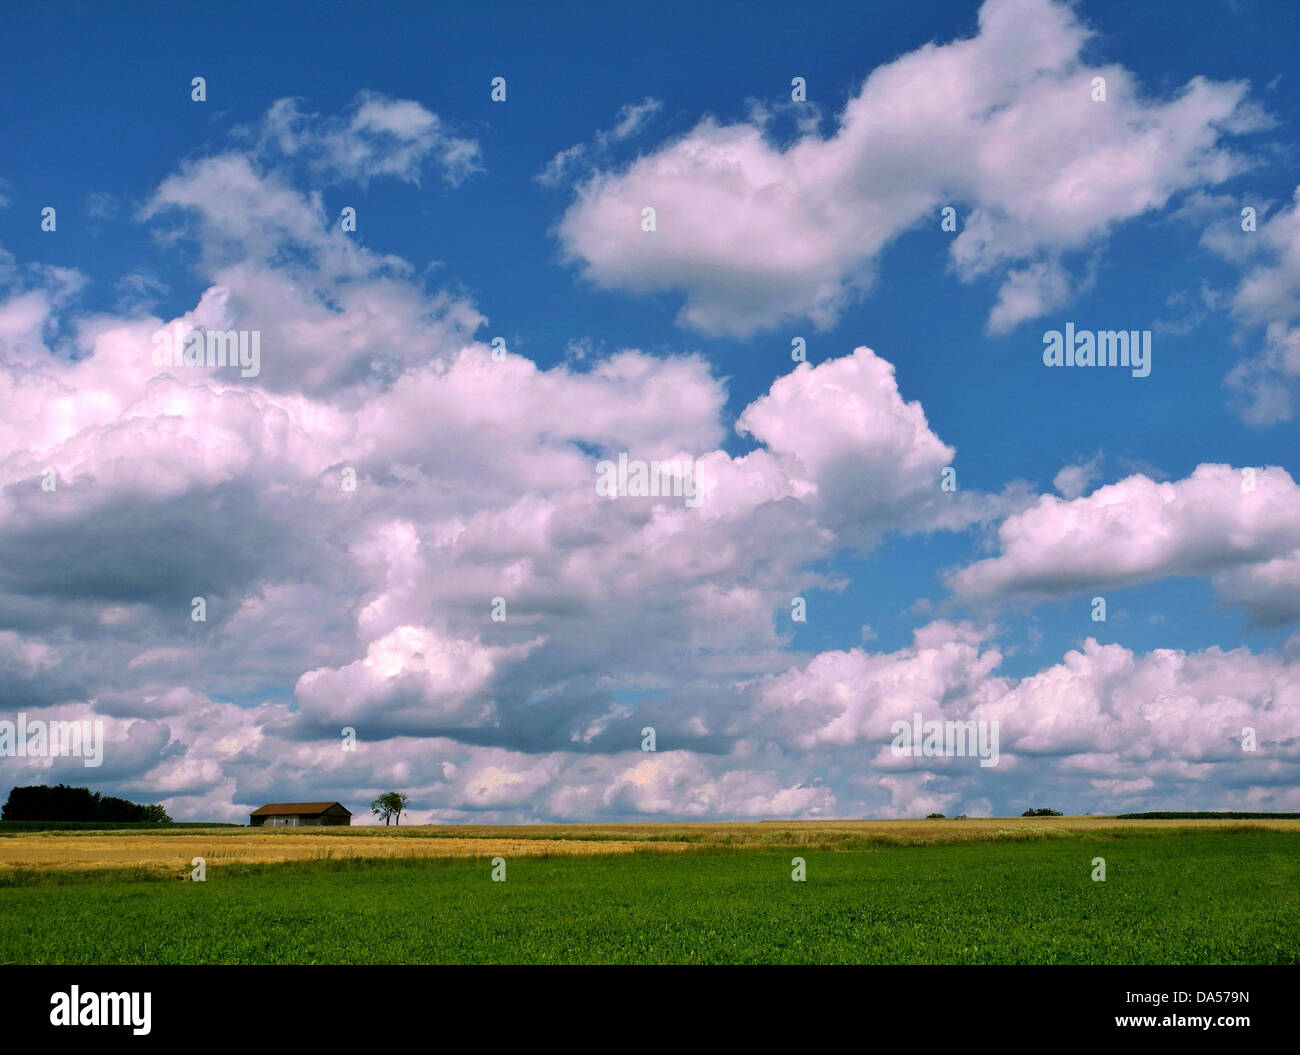 Germany, Upper Palatinate, meadow, field, barn, agriculture, sky, blue, clouds, Cumulus Stock Photo